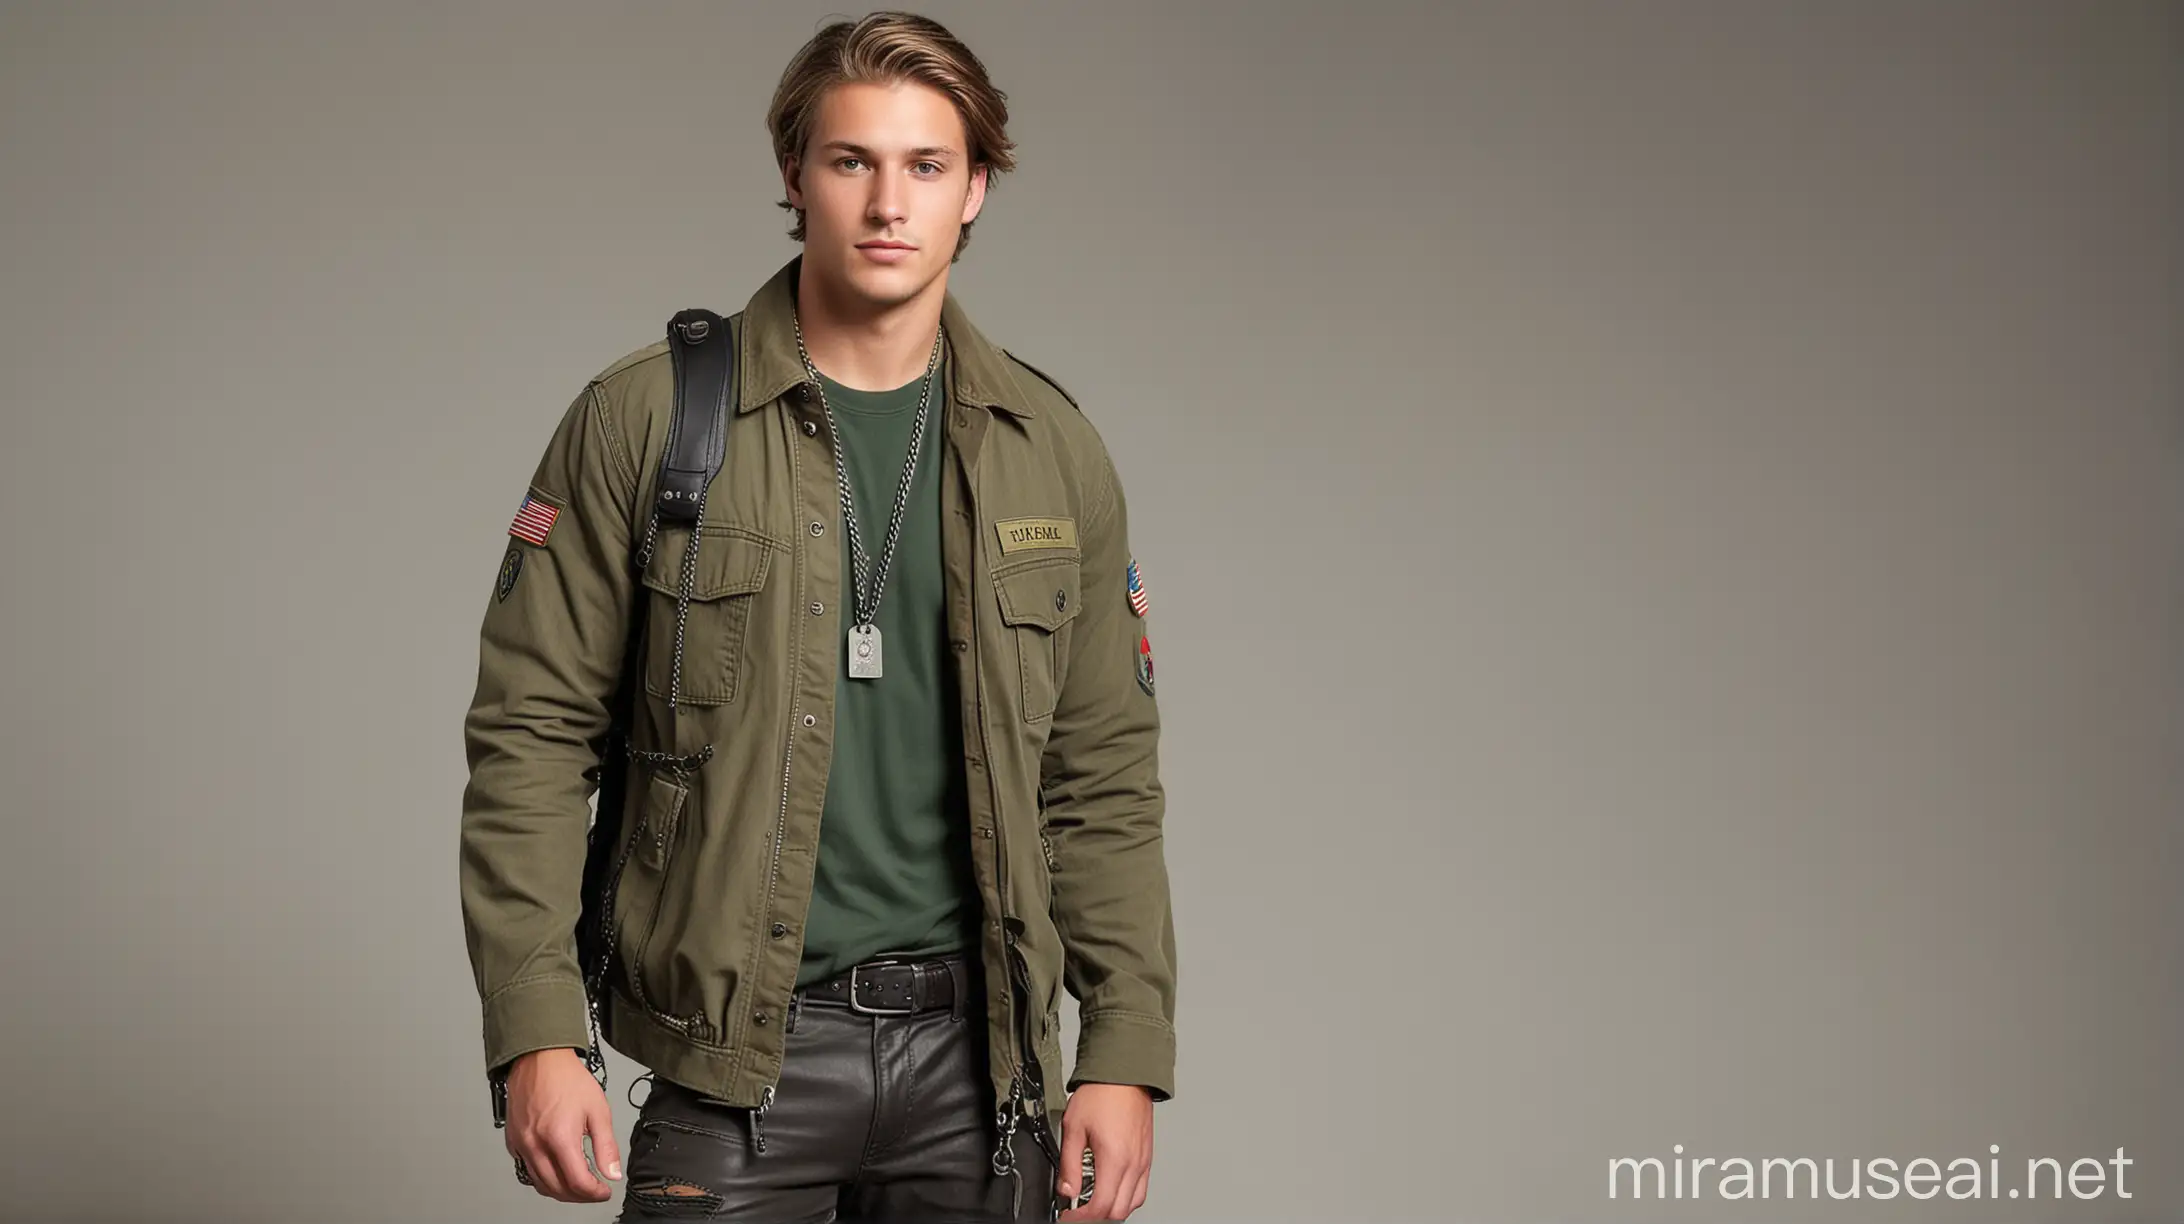 A Caucasian guy, 23 years old, blonde balayage with chin-length bob haircut. He has green eyes, wore a khaki shirt with a worn green military jacket. A leather bag on his waist, ripped dark pants, hiking leather boots and a double dog-tag chain as necklace. He carries an smart and charismatic aura. Full-body model.